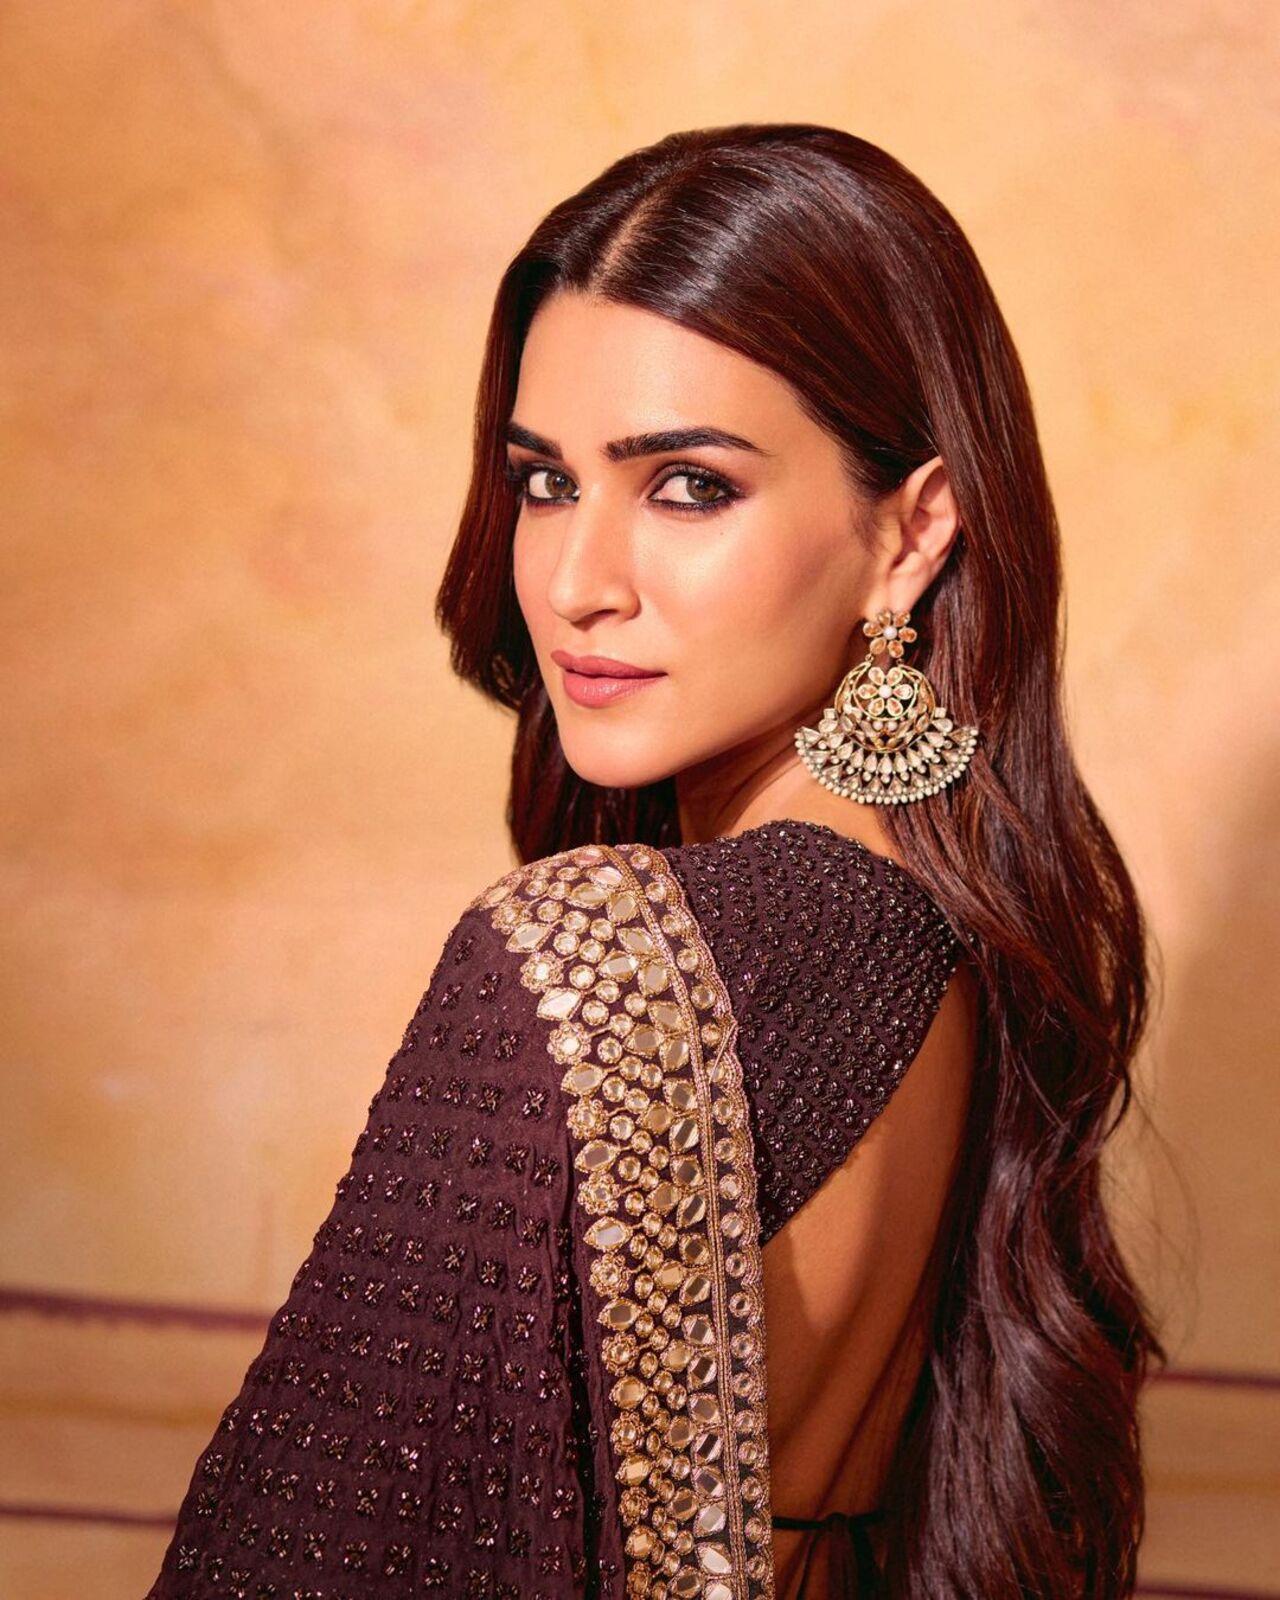 Kriti chose to wear heavy earrings to complement her saree. With her soft curls, Kriti looked stunning